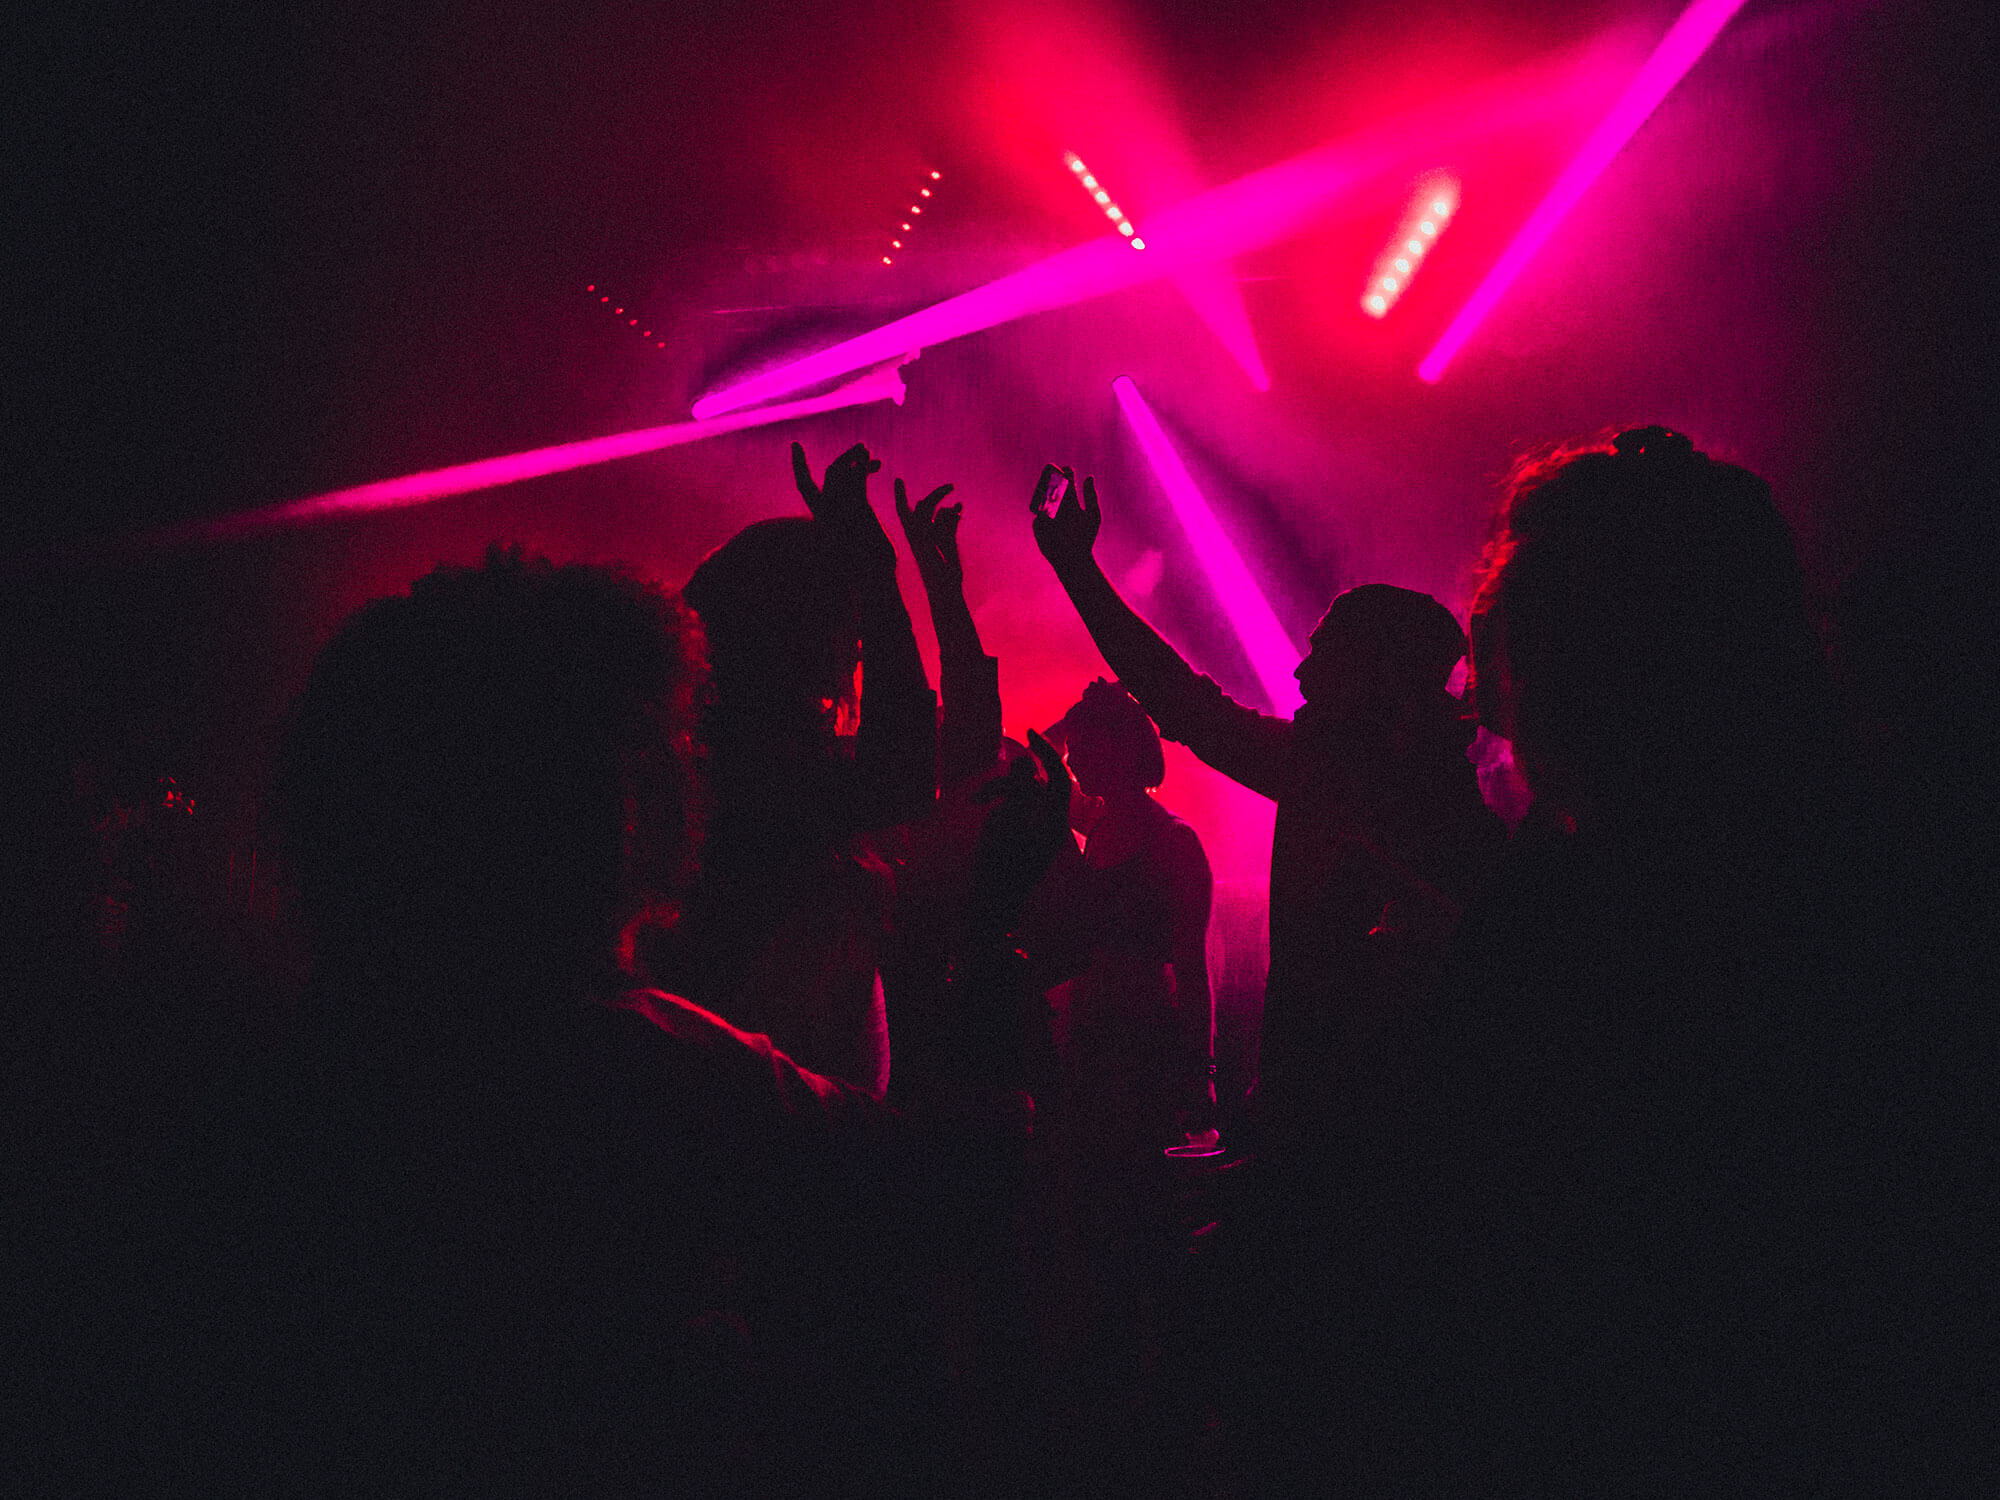 eople dancing in a nightclub with smoke machines and strobe lighting around them.